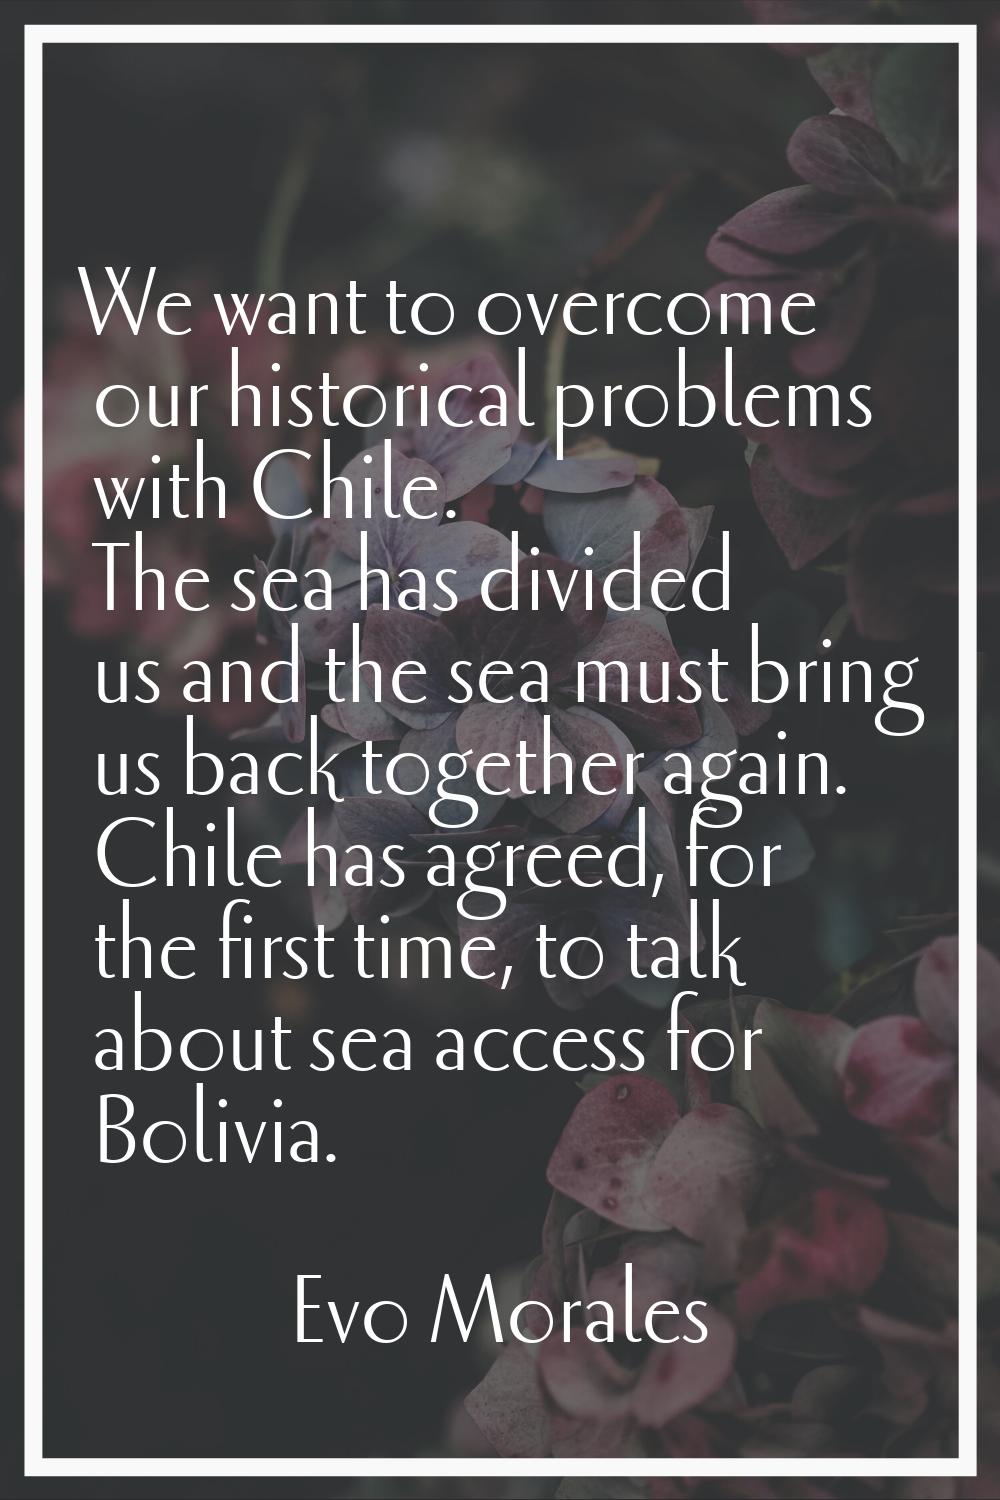 We want to overcome our historical problems with Chile. The sea has divided us and the sea must bri